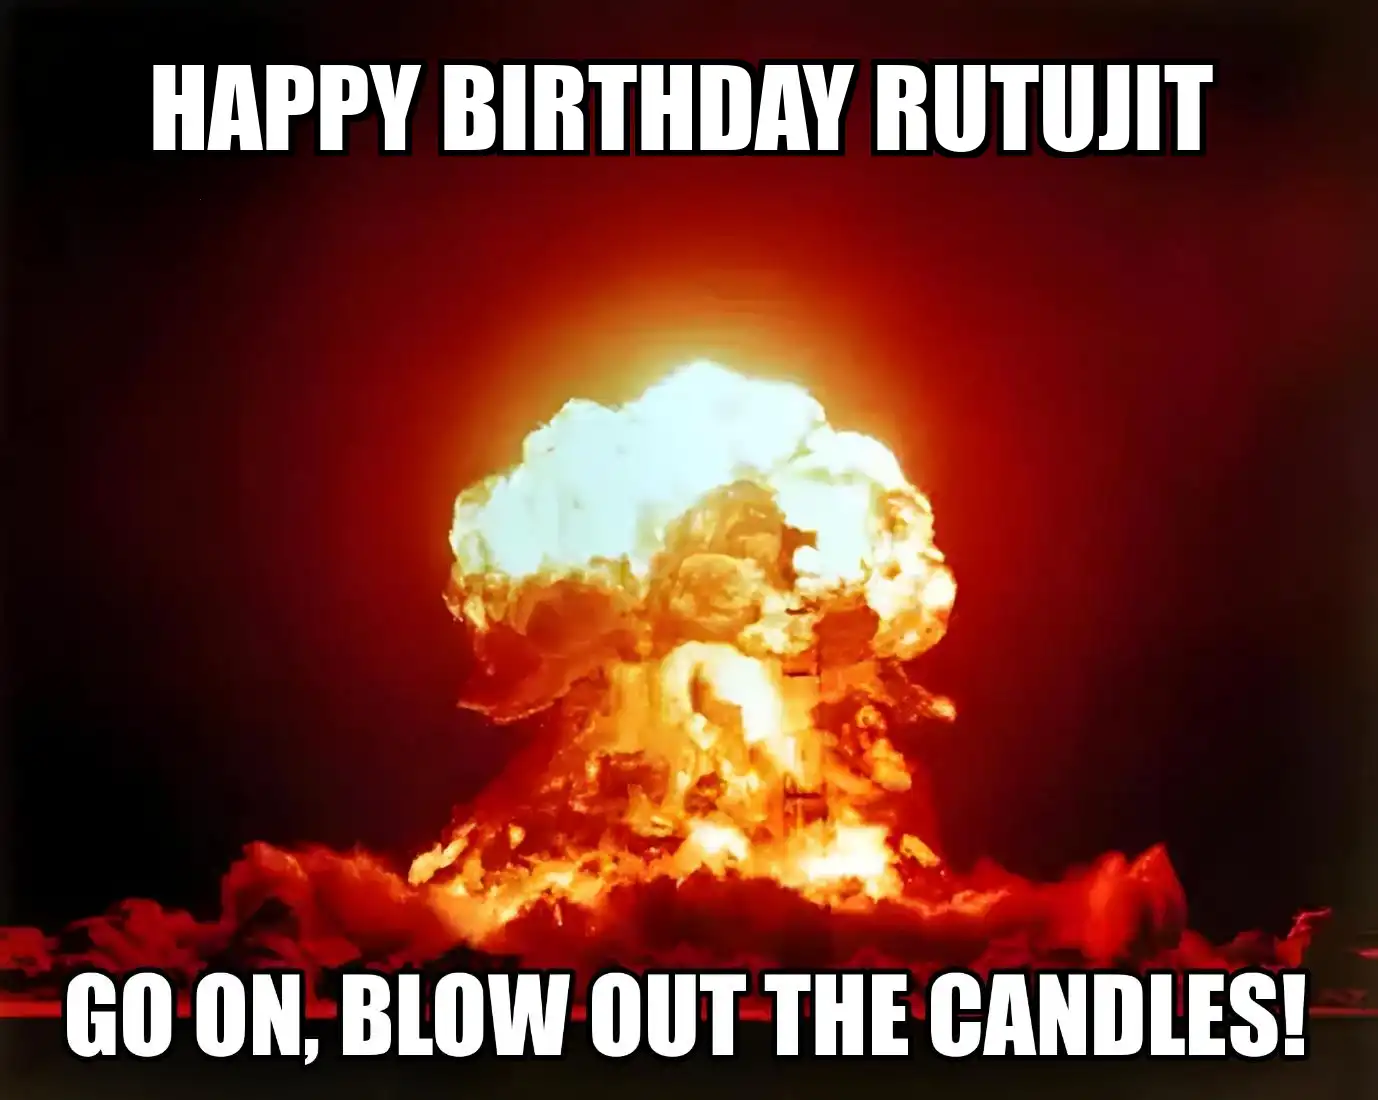 Happy Birthday Rutujit Go On Blow Out The Candles Meme